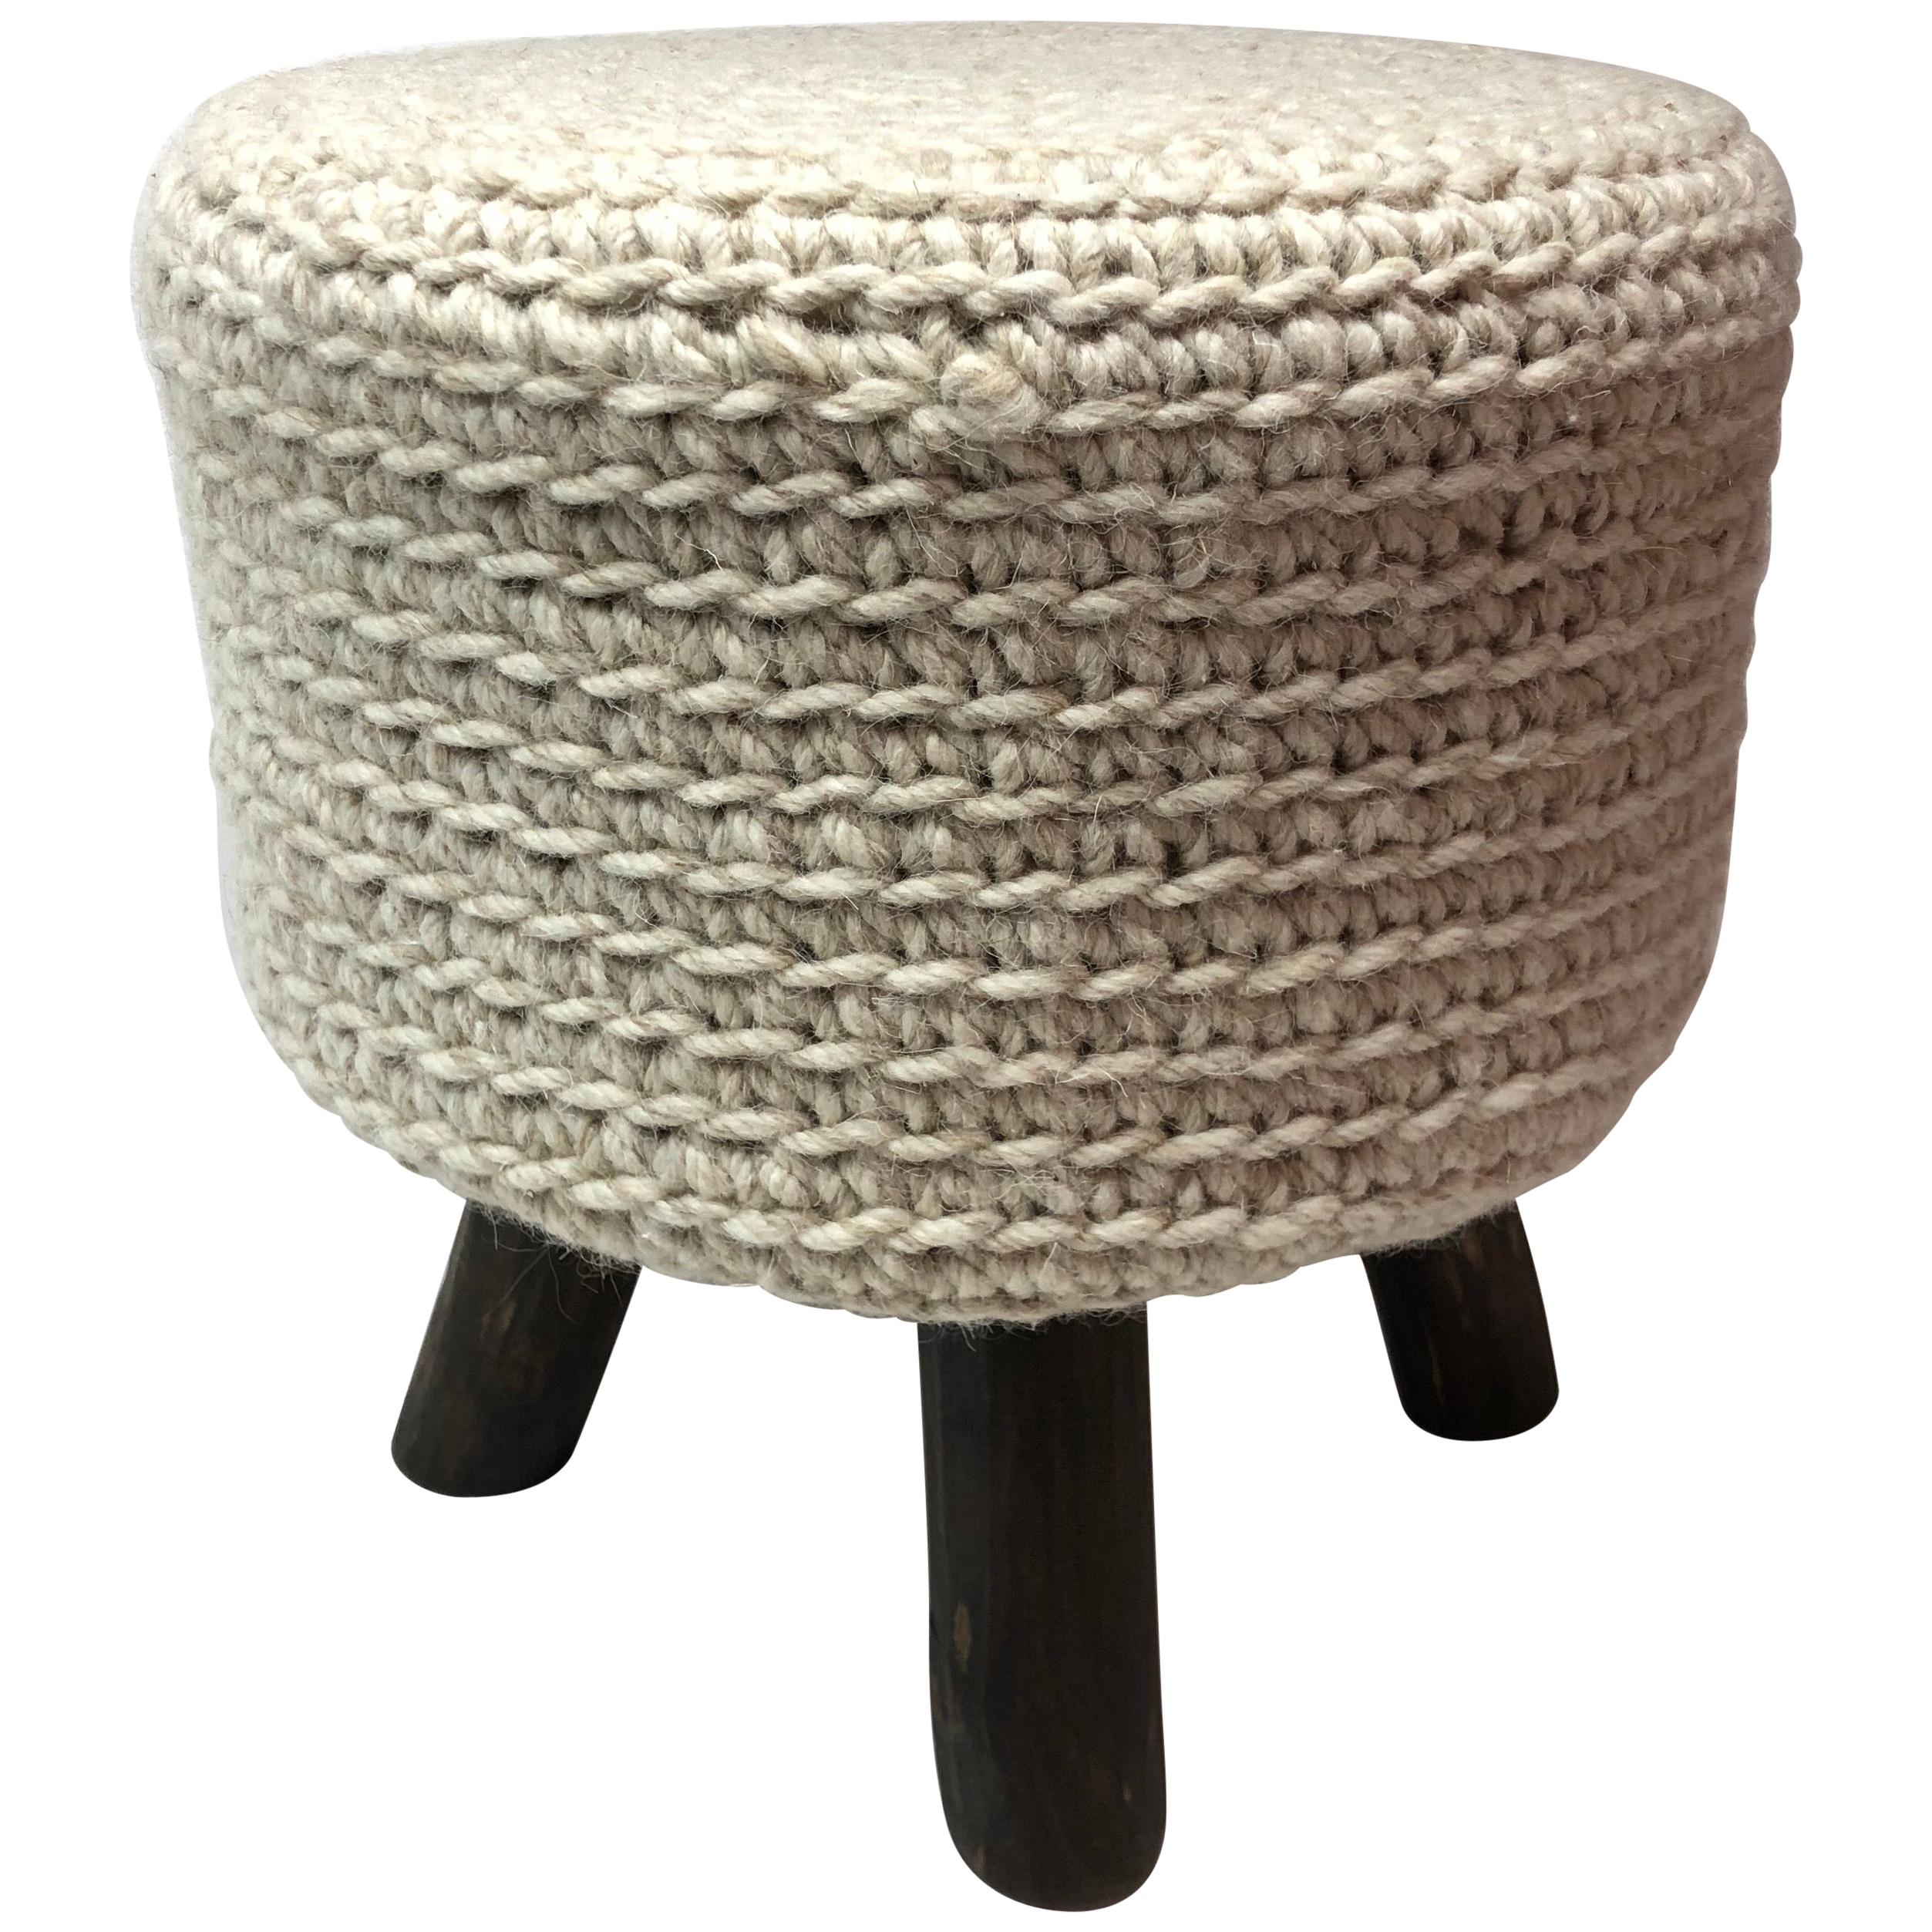 Knitted Stool with Wood Legs